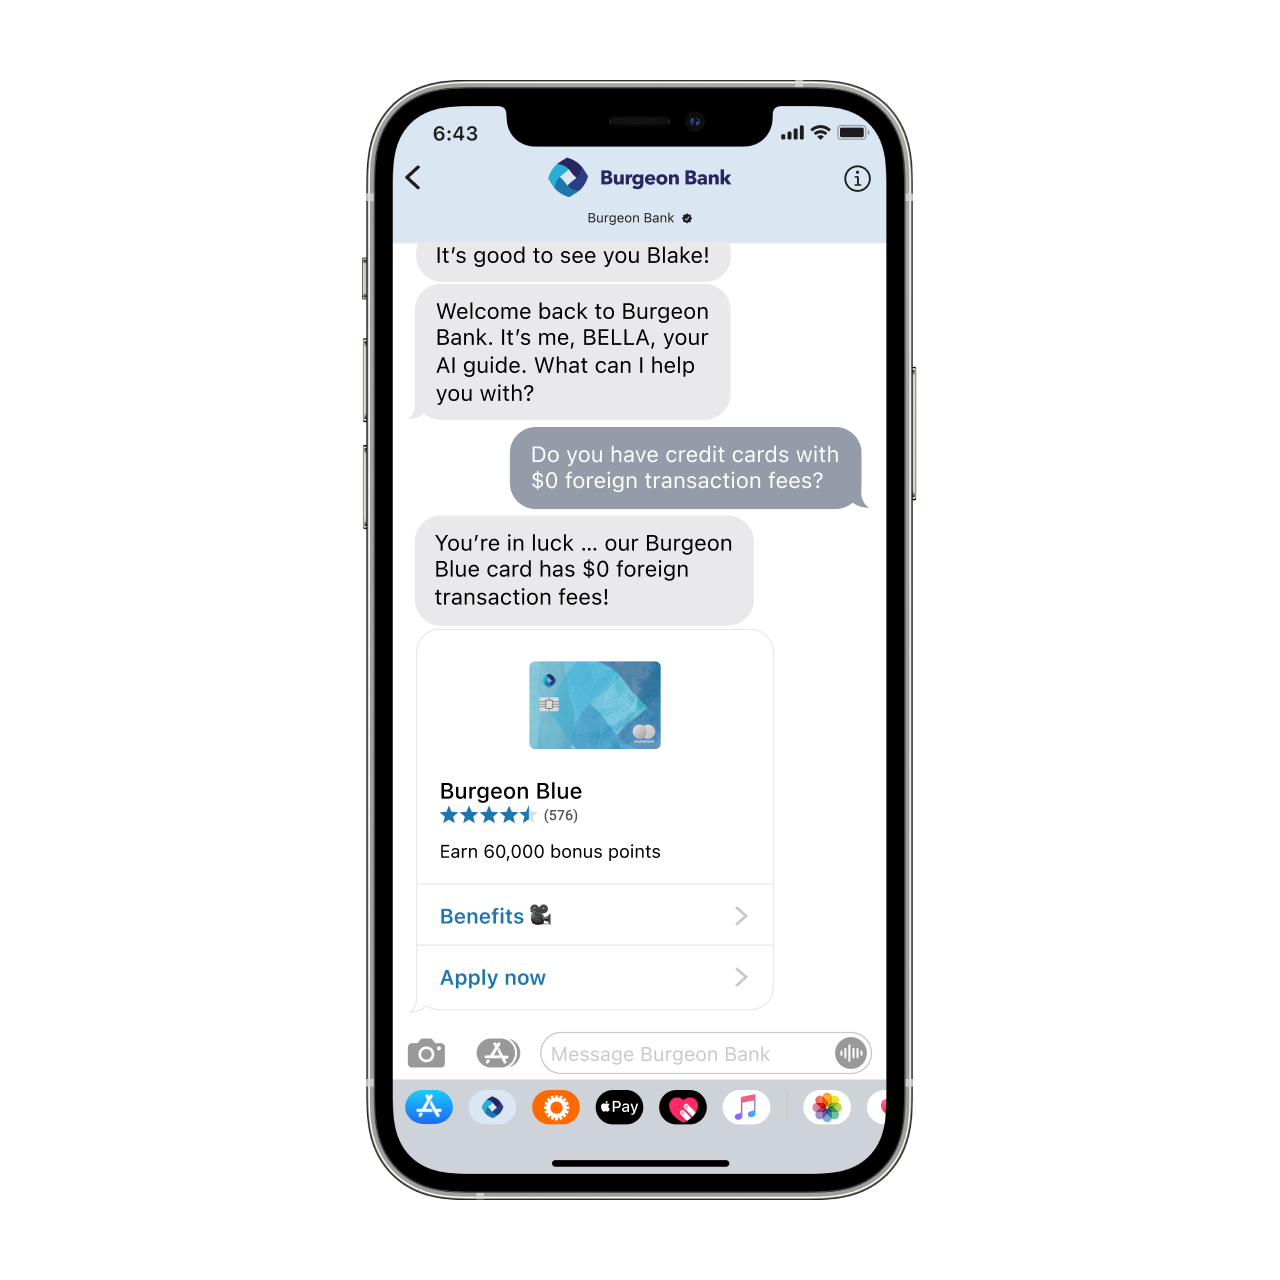 Apple Messages for Business example conversation 